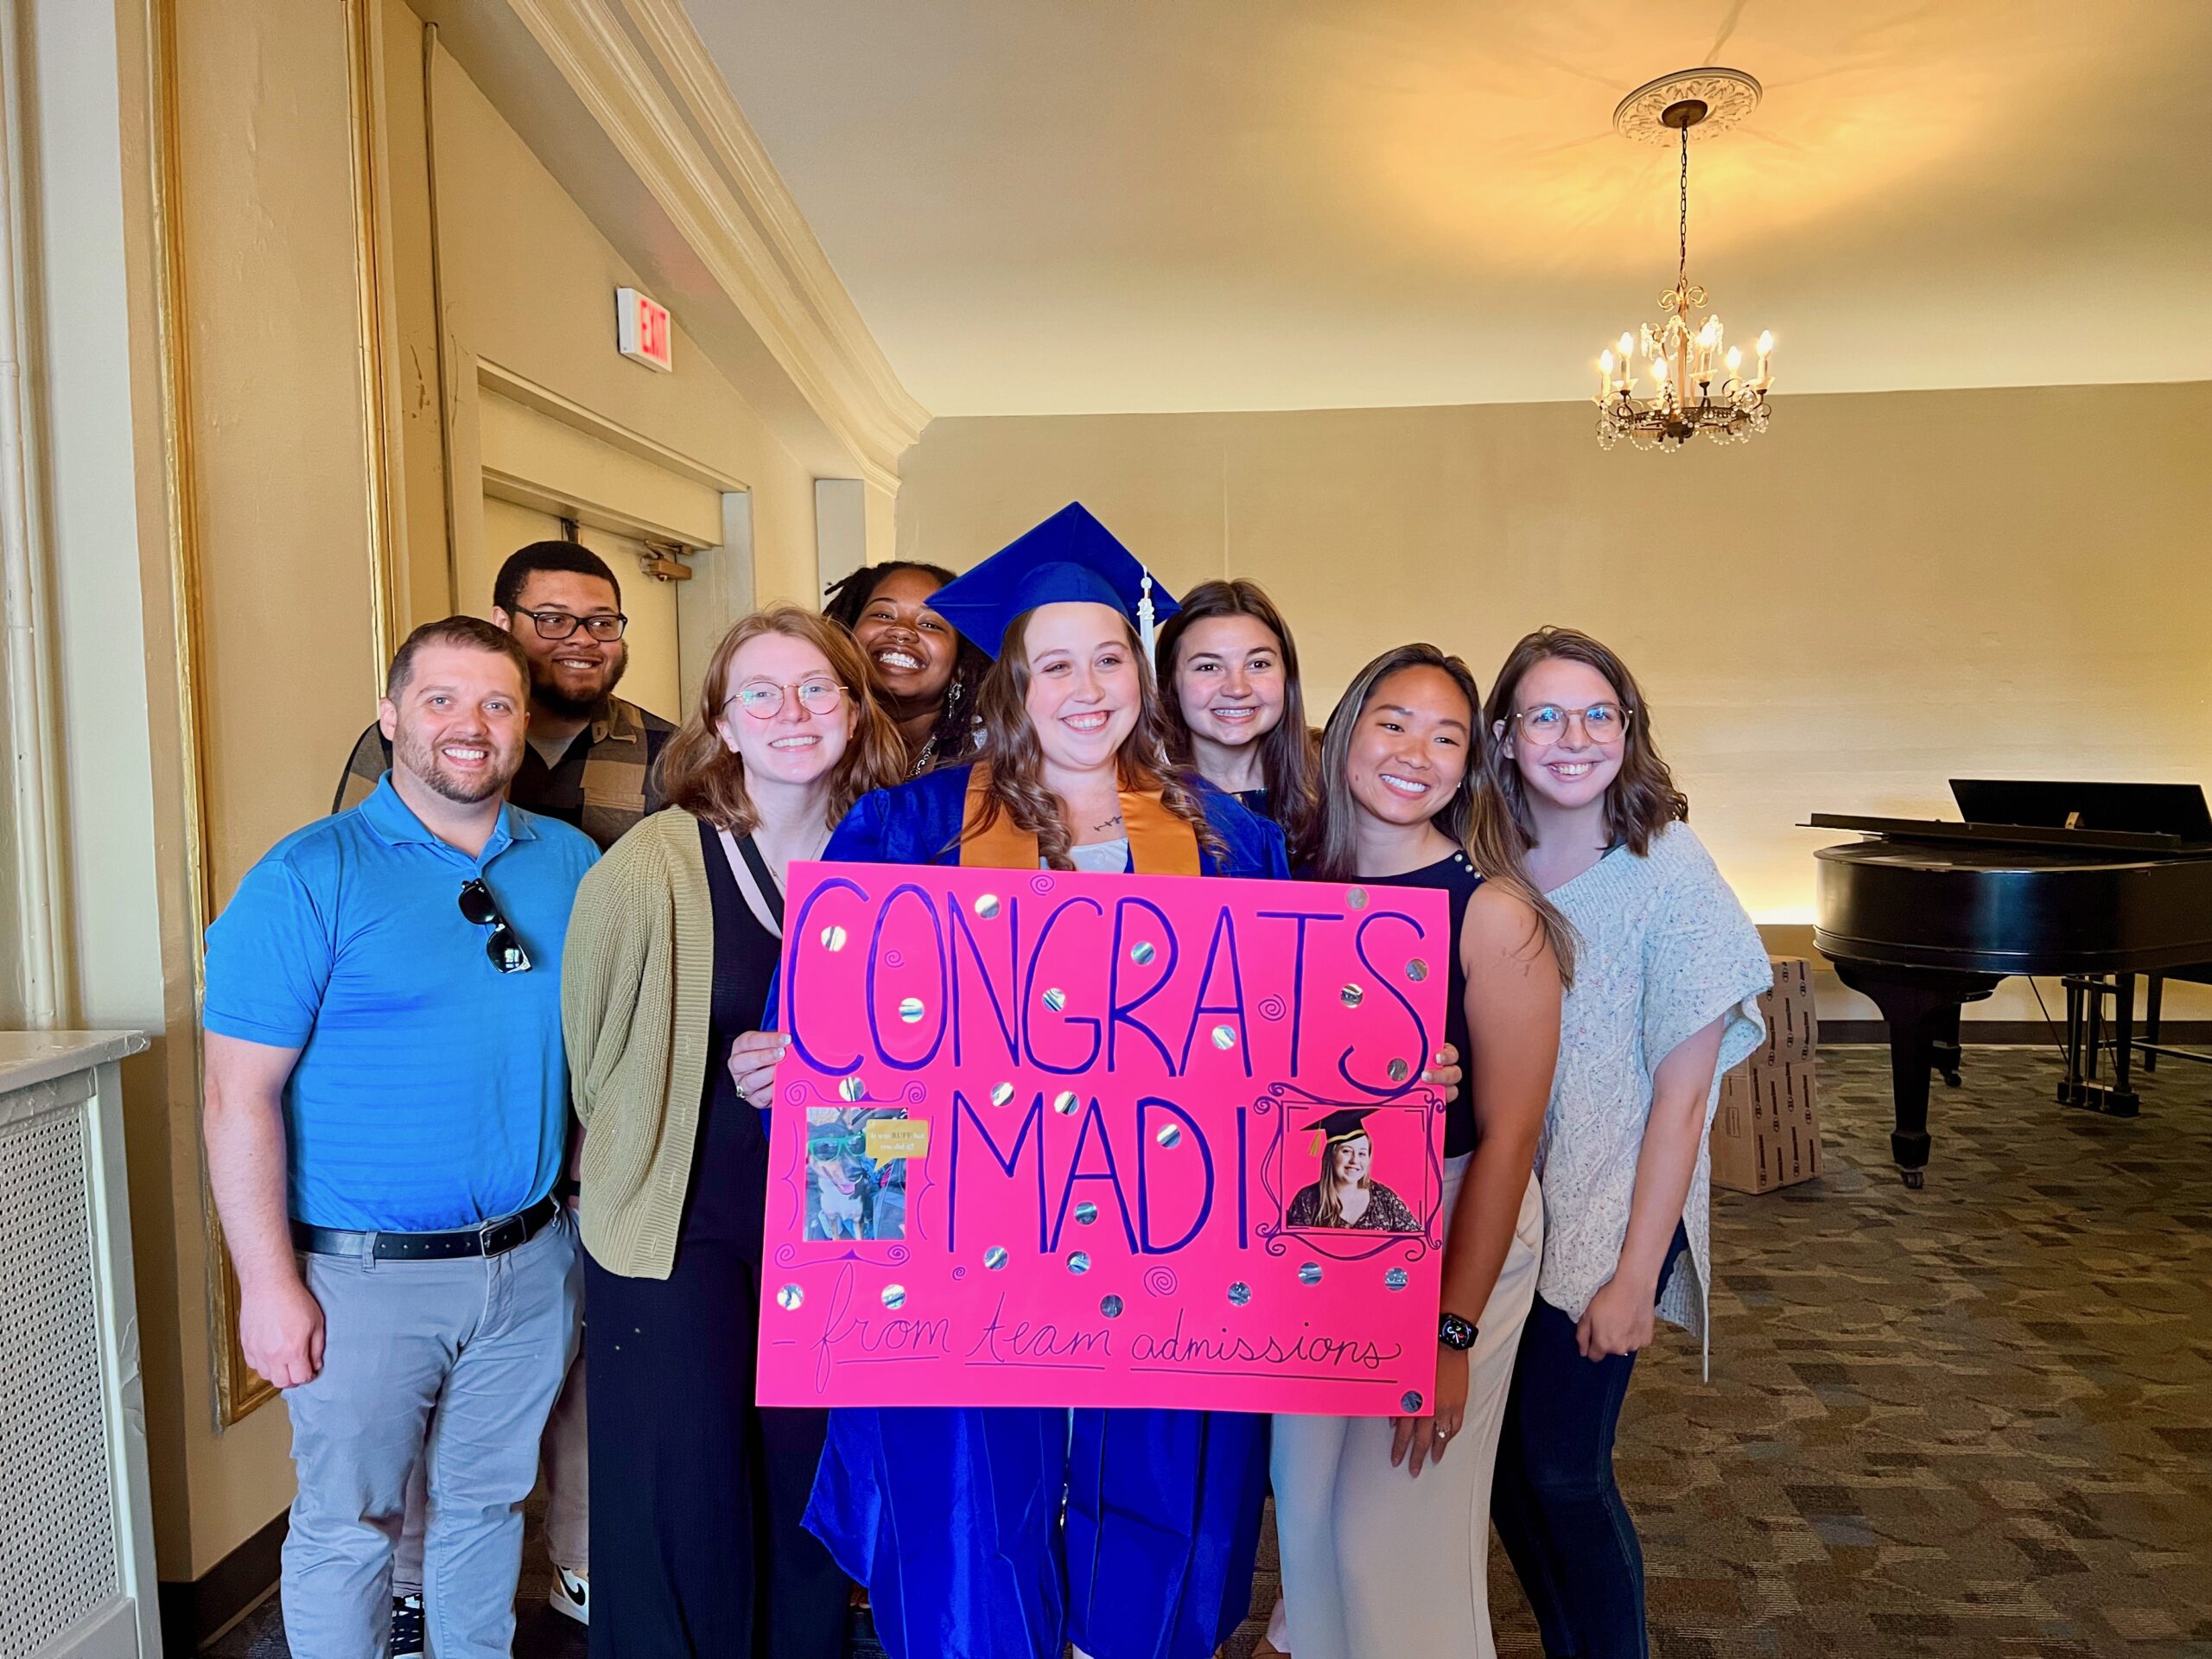 Spalding Admissions Counselor Madi Jaggers after her commencement ceremony with the rest of the Admissions team